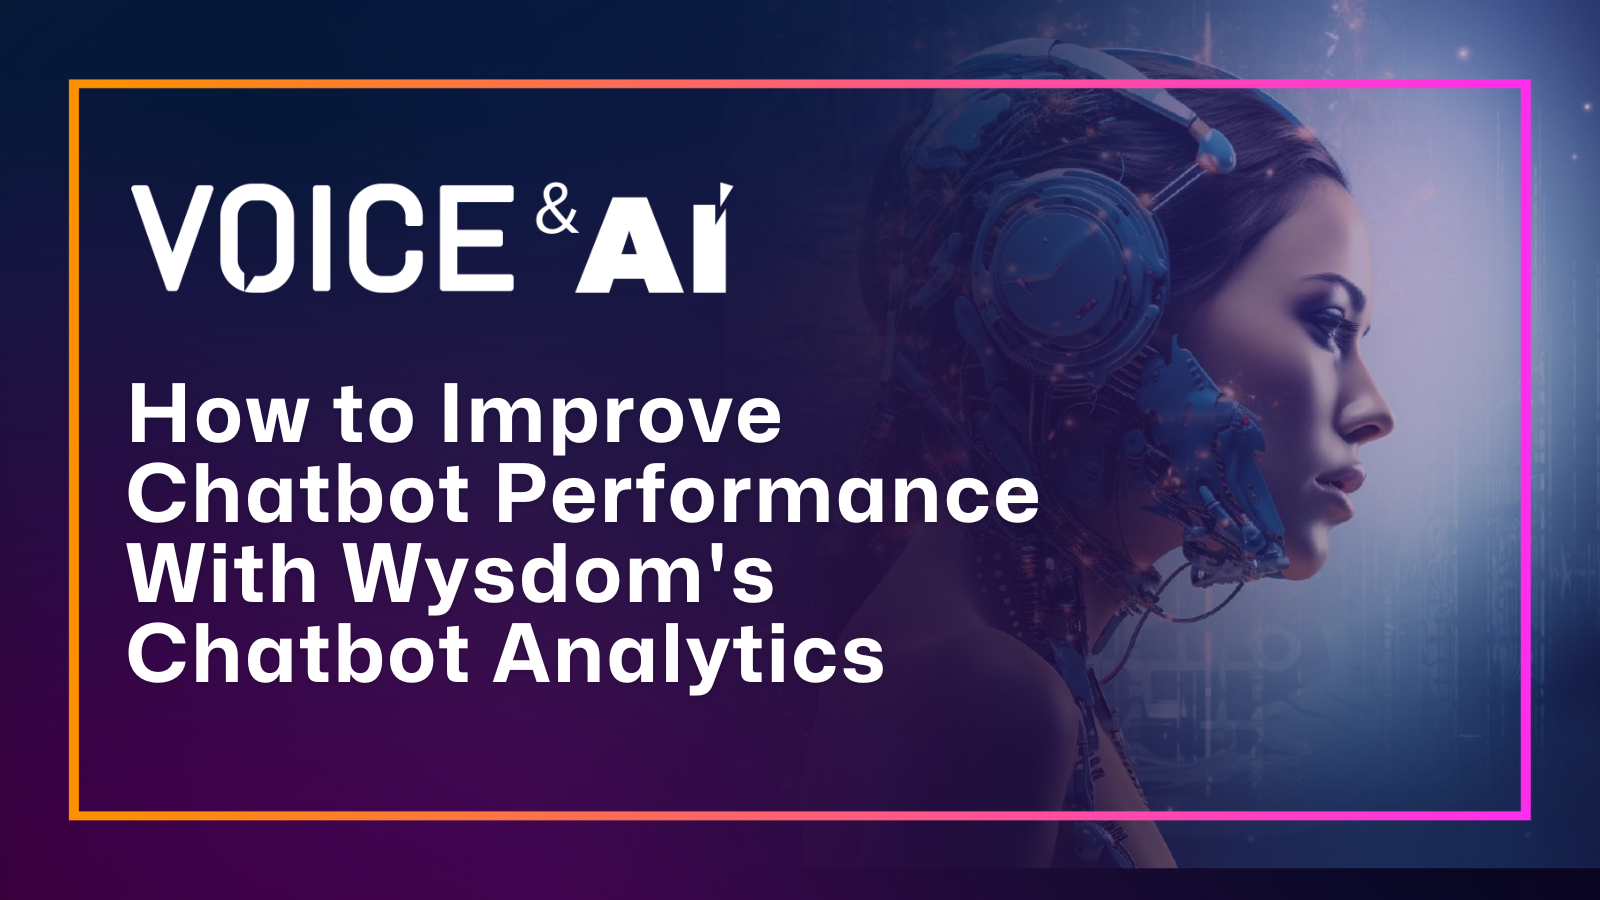 How To Improve Chatbot Performance With Wysdom's Chatbot Analytics